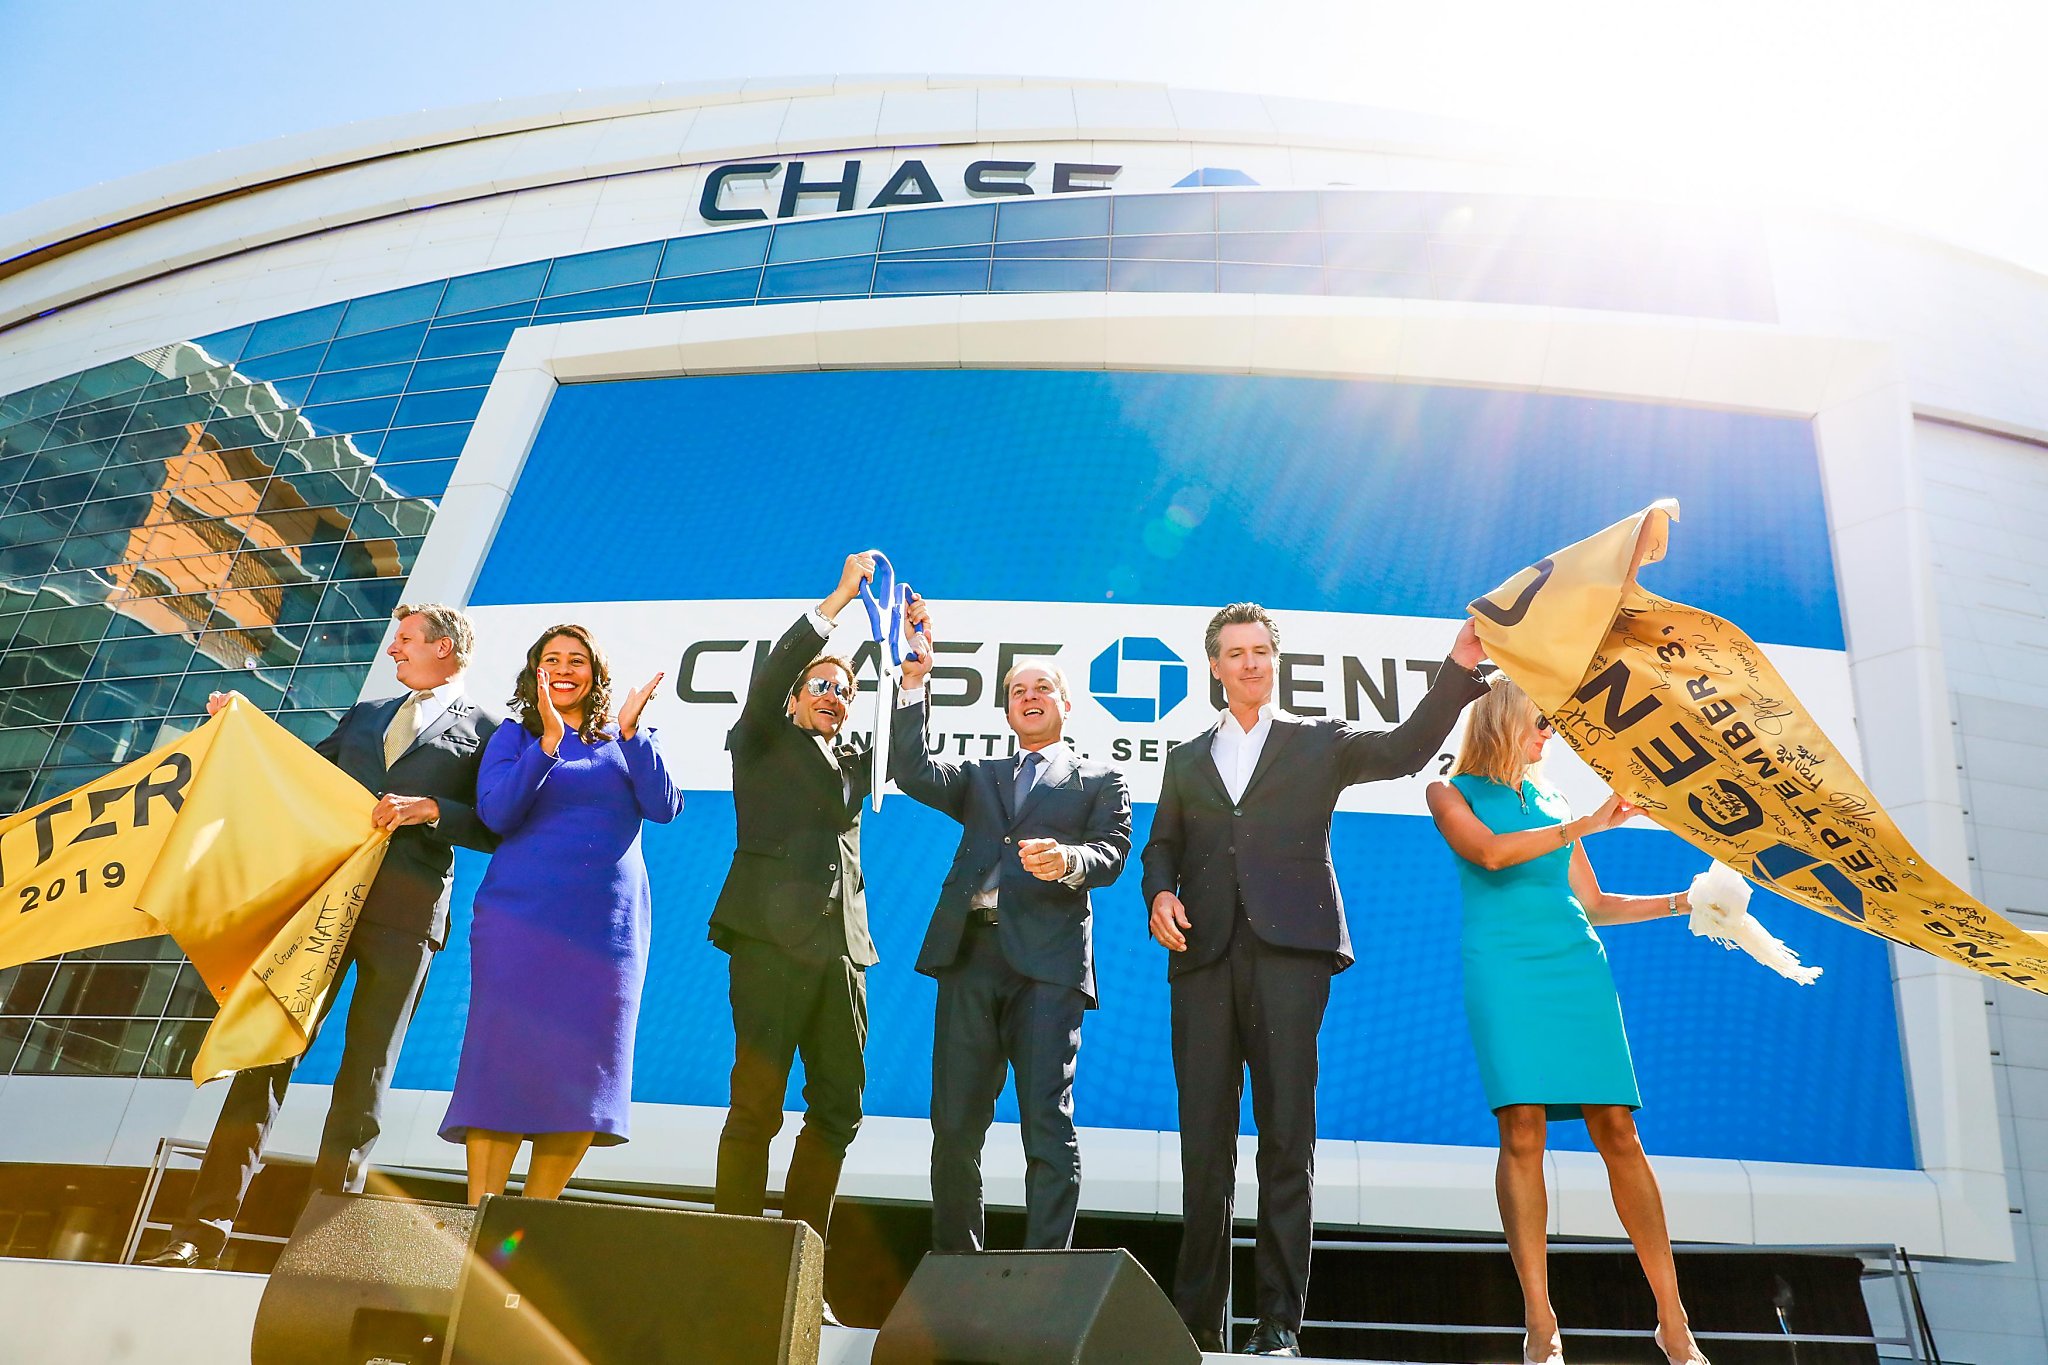 Chase Center ribbon cutting: Impossible dream becomes Warriors' reality